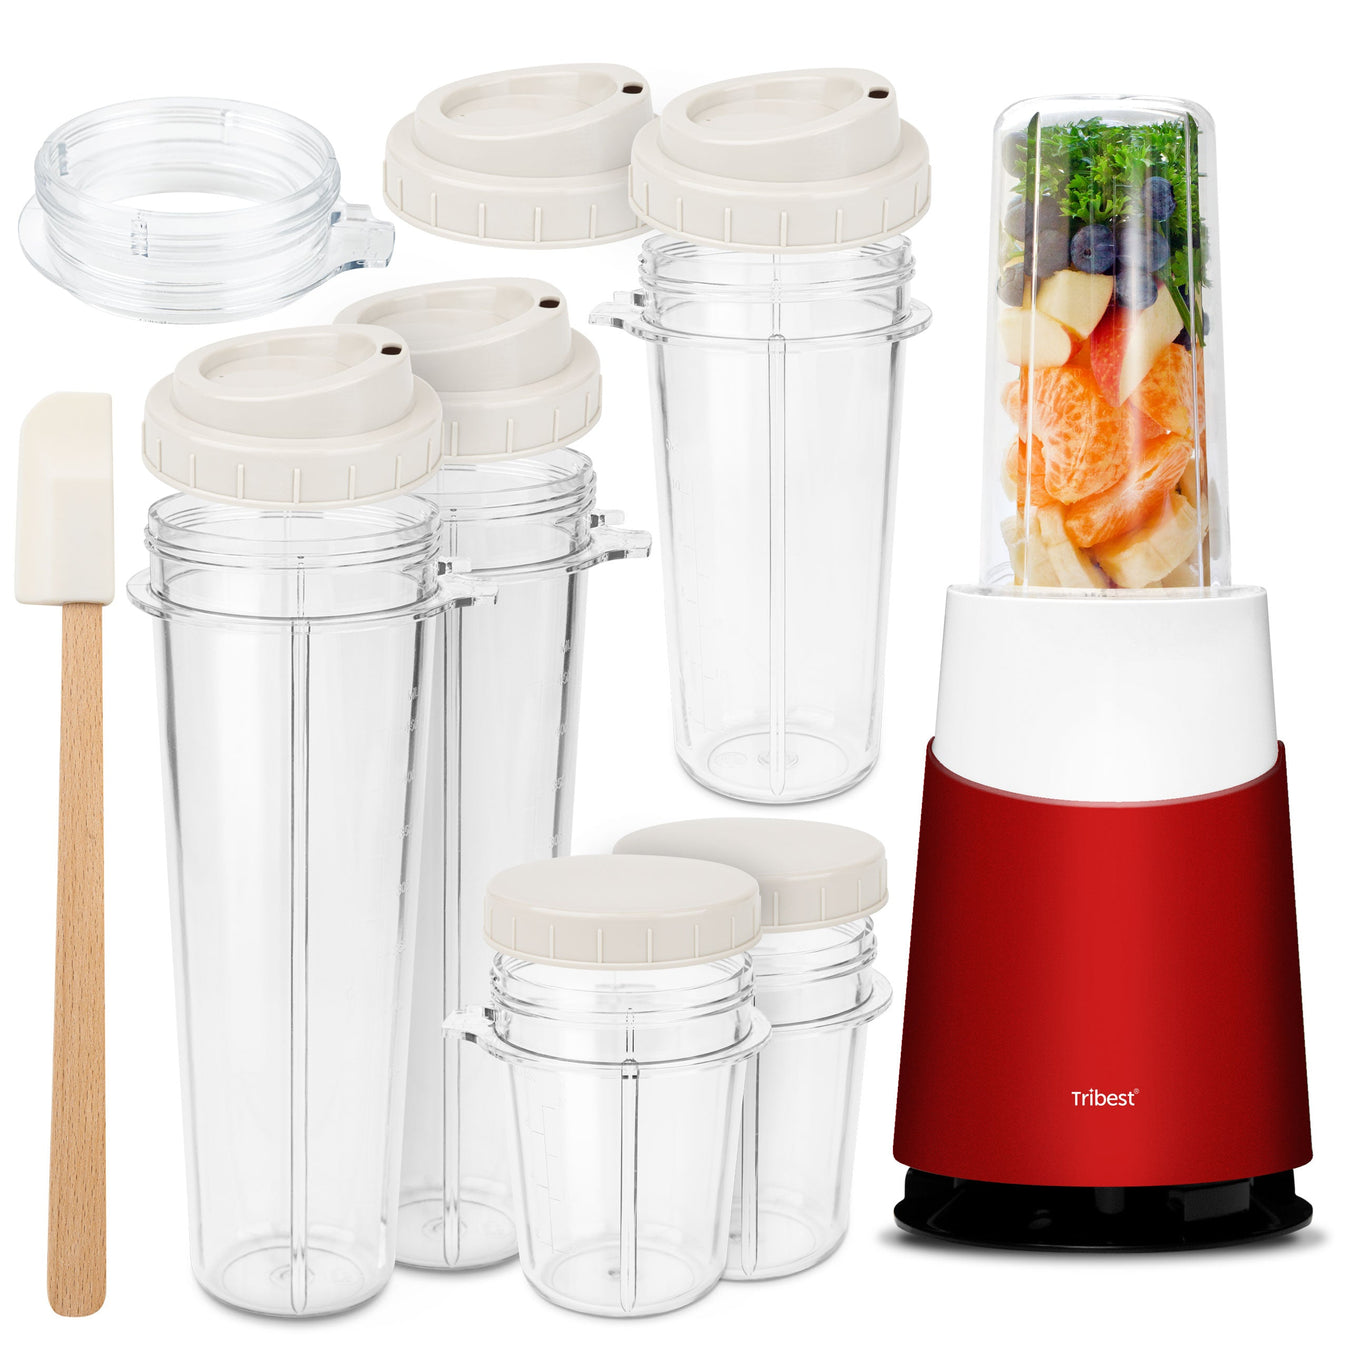 Personal Blender II Mason Jar Ready (Family16-Piece Set) in Red PB-420RD-A - Tribest